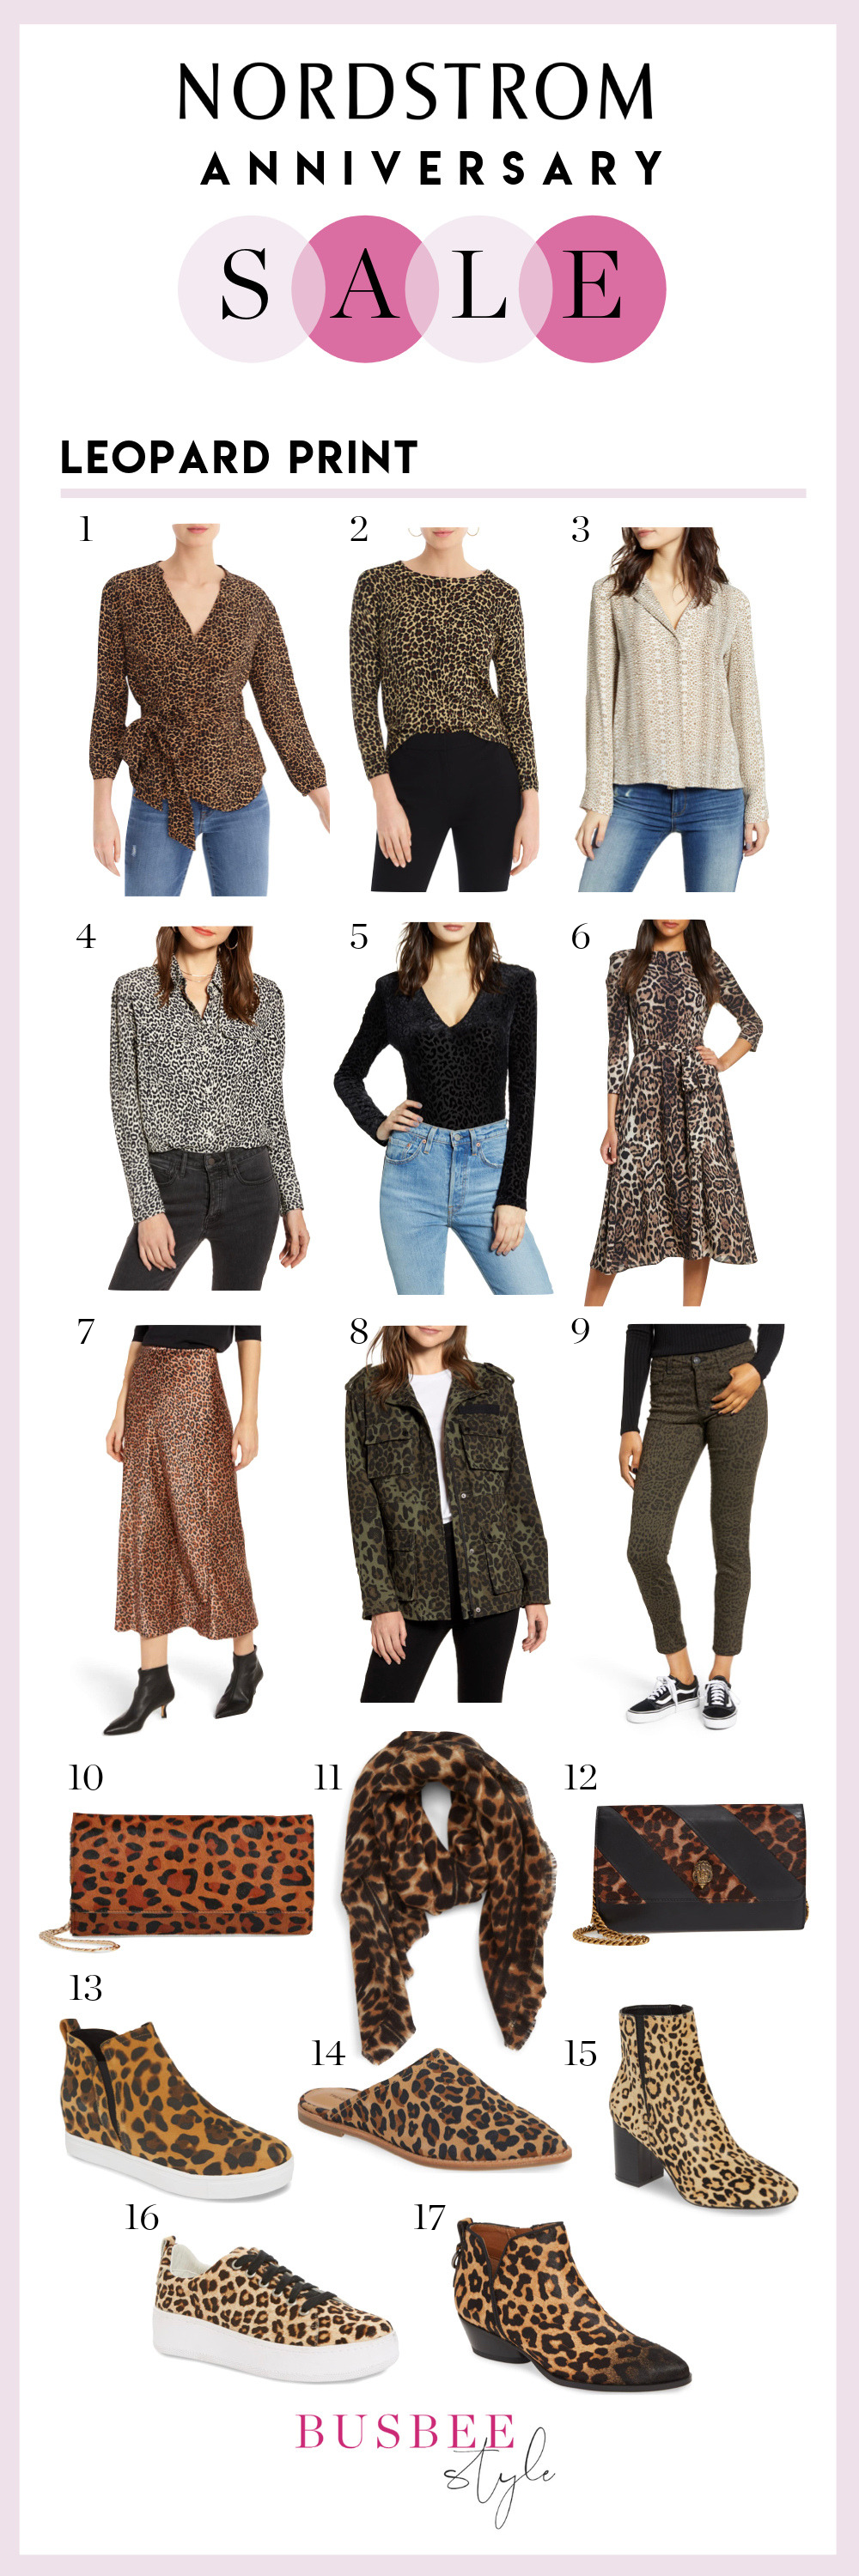 Leopard Print, Fashion blogger Erin Busbee of BusbeeStyle.com sharing the best leopard print pieces from the Nordstrom Anniversary Sale 2019 including tops, jackets, bottoms, accessories, and shoes